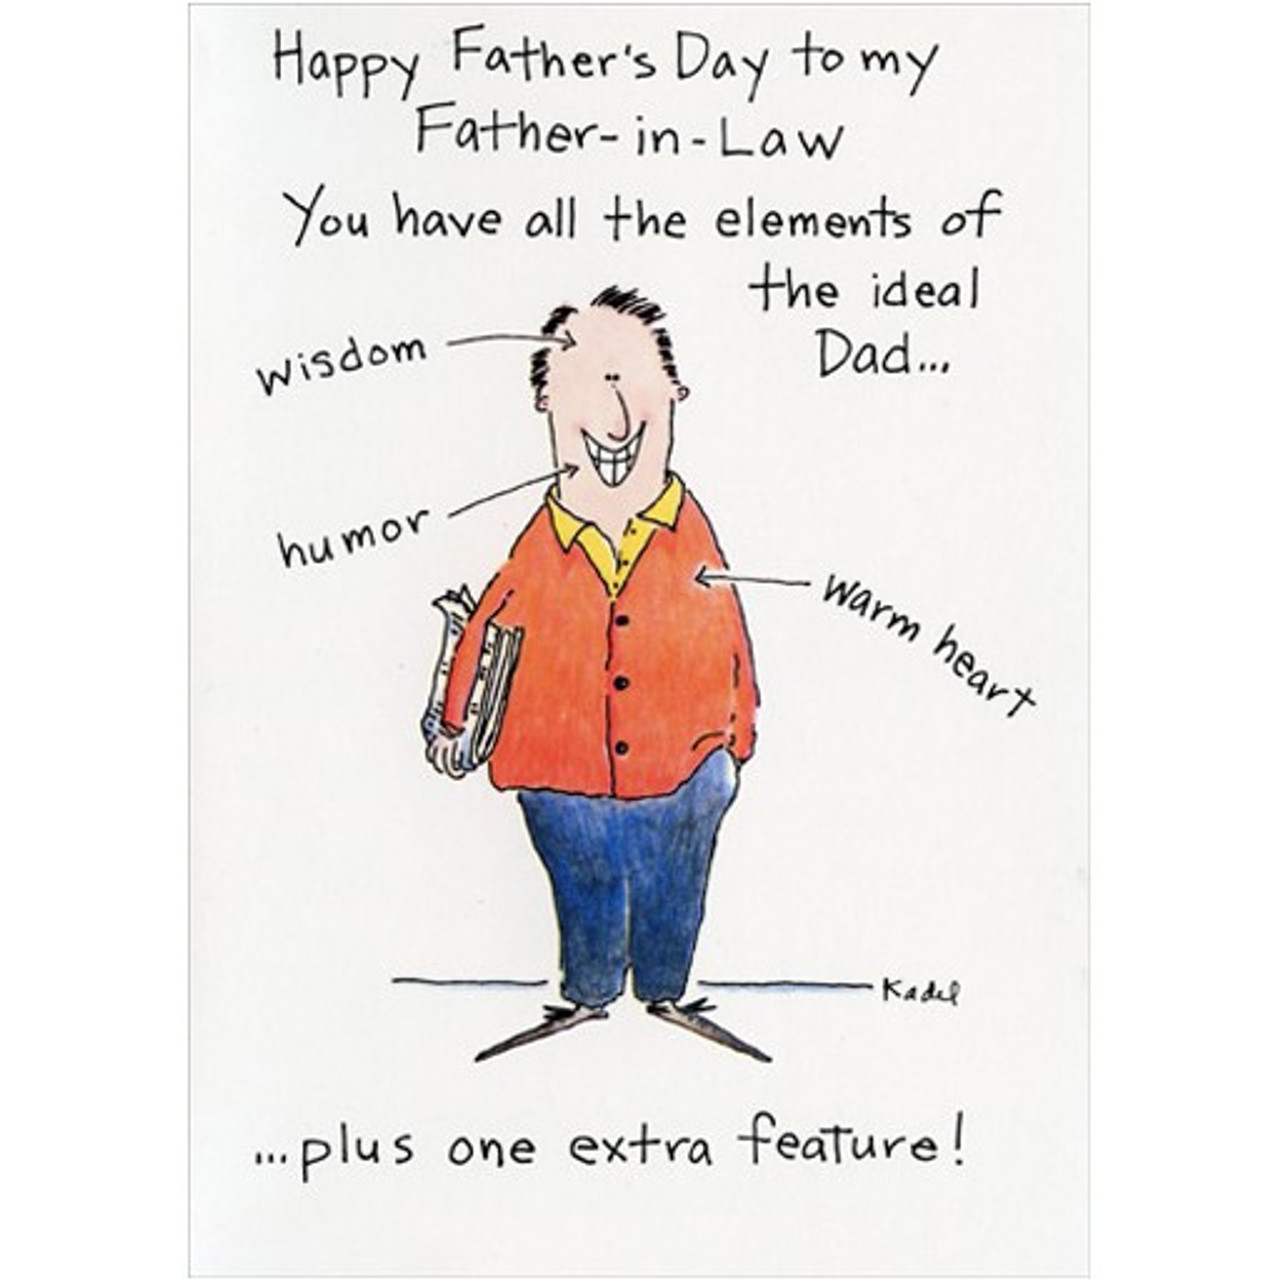 No Stories Funny / Humorous Father's Day Card for Father-in-Law